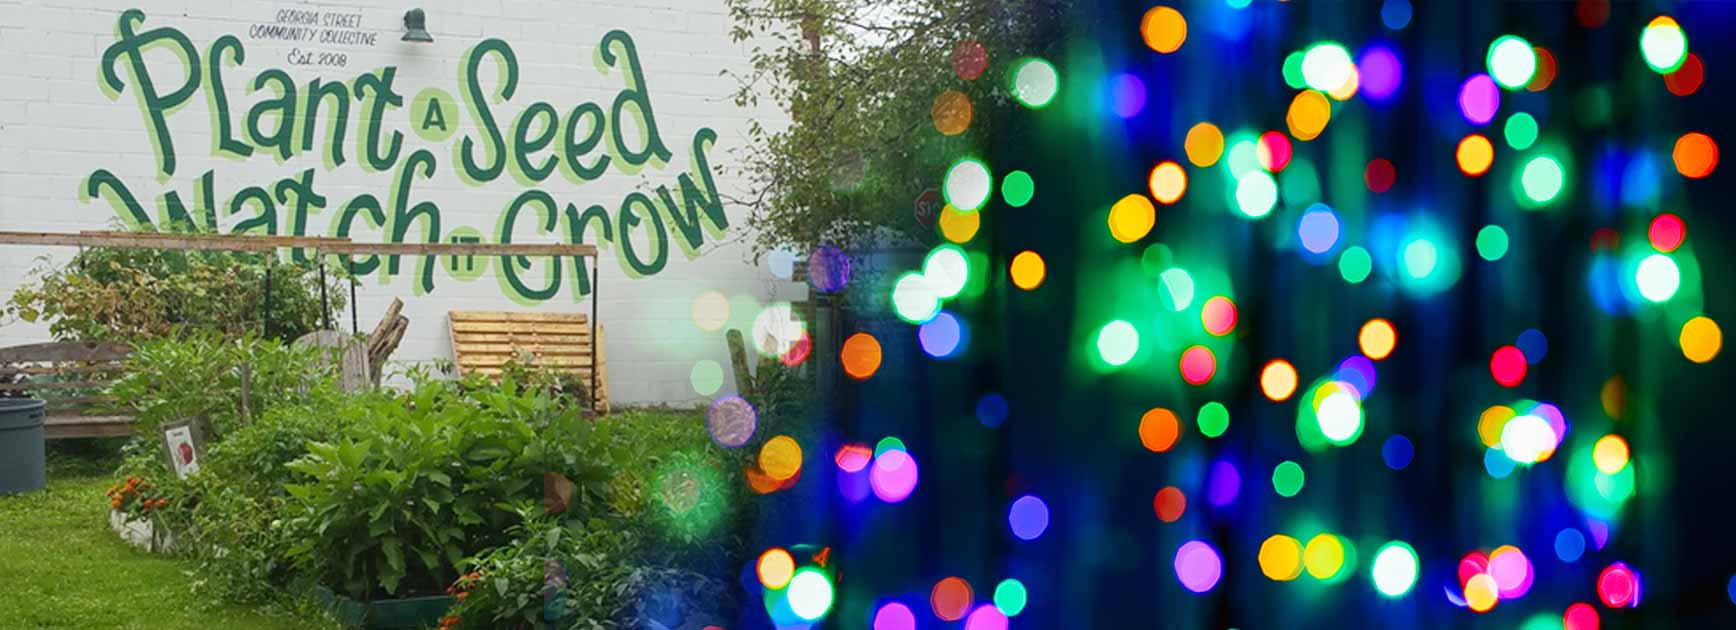 The Georgia Street Community Collective farm and colorful holiday lights